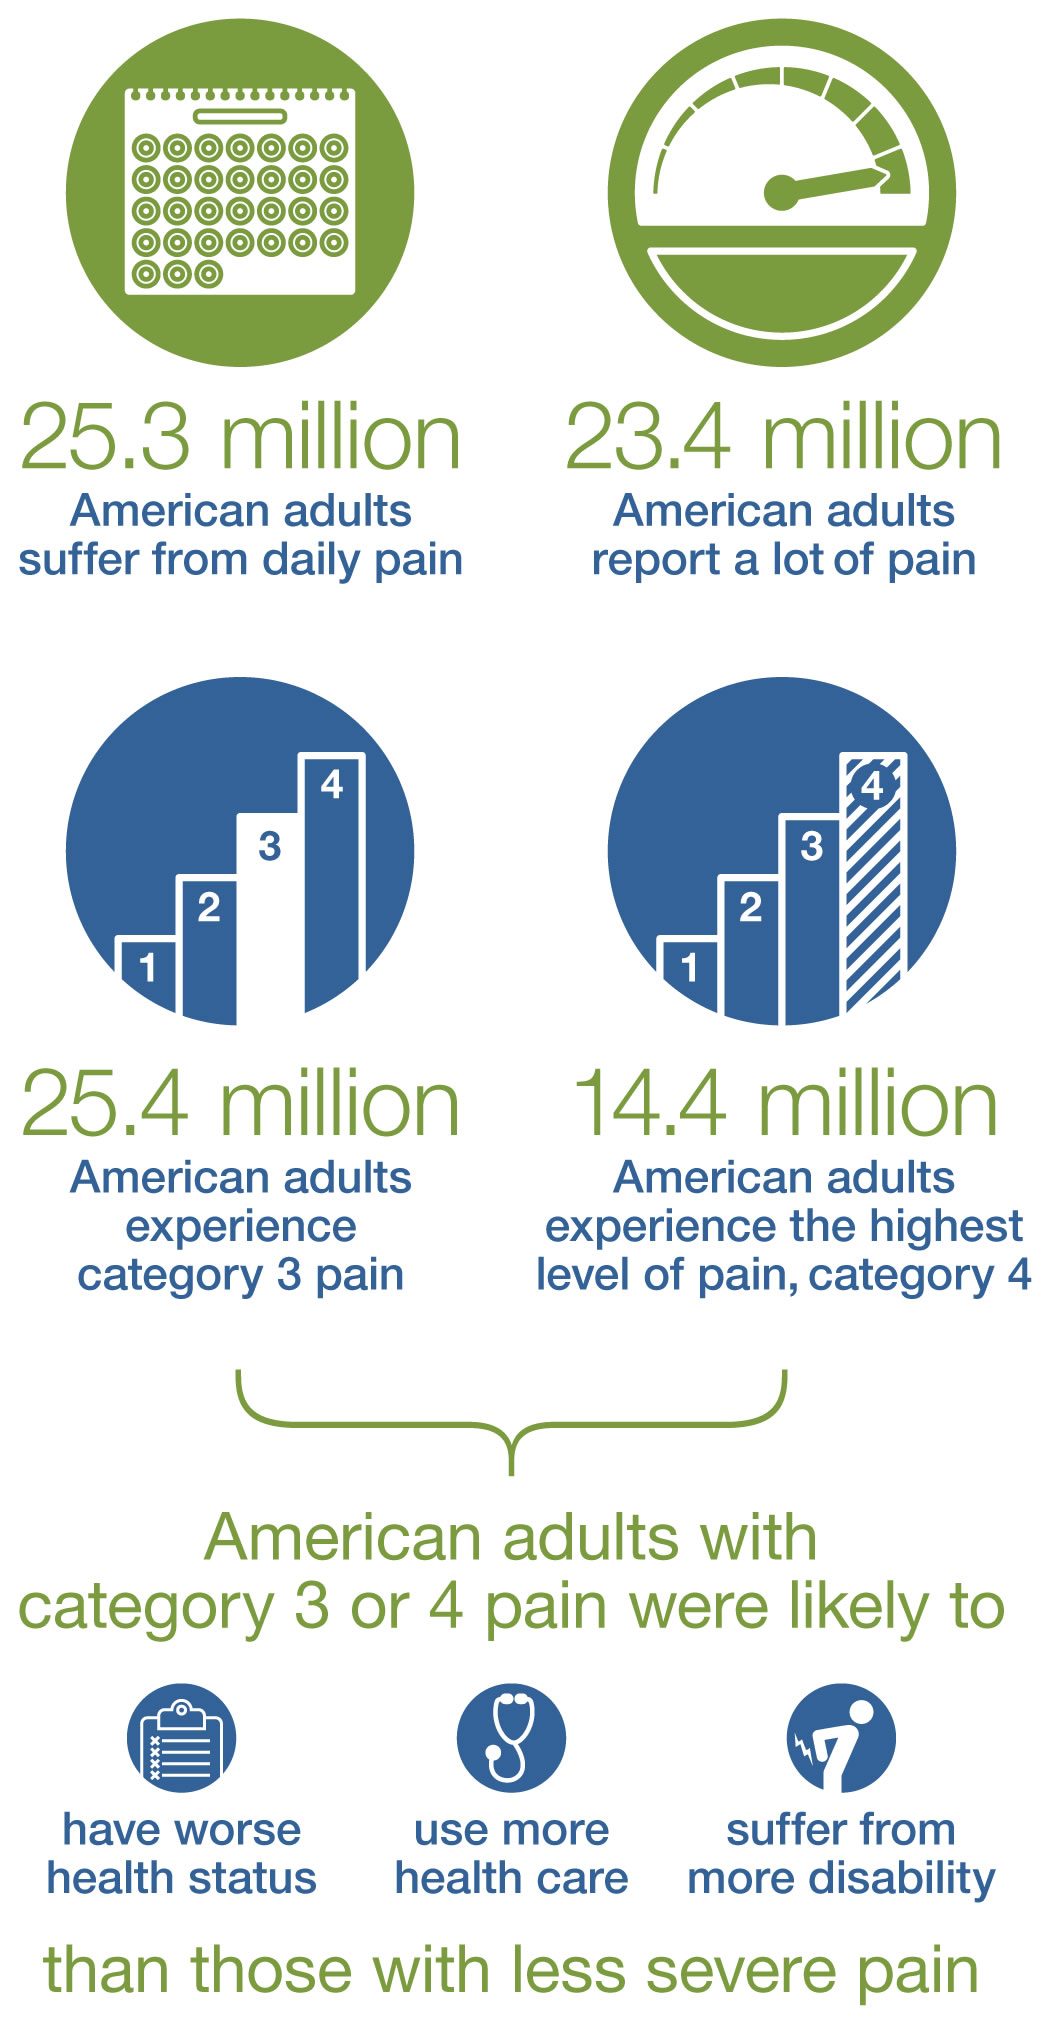 Adults suffer from daily pain